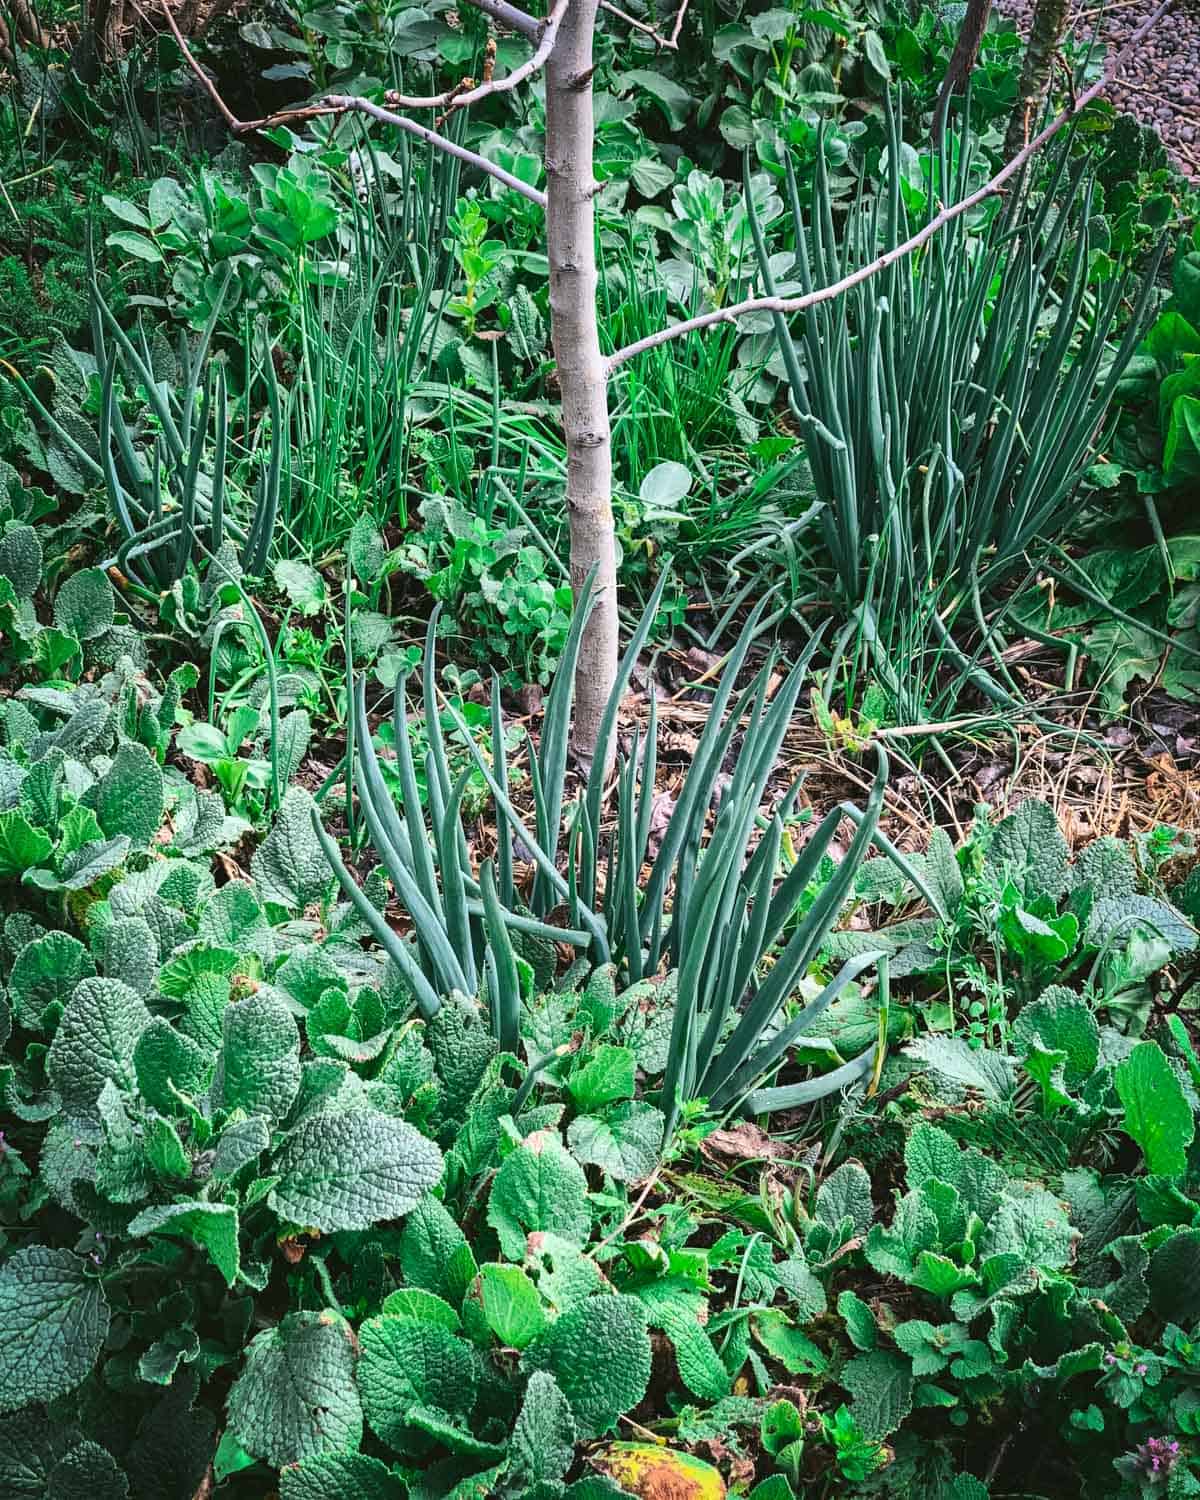 Walking onions growing on the ground of a permaculture forest garden.